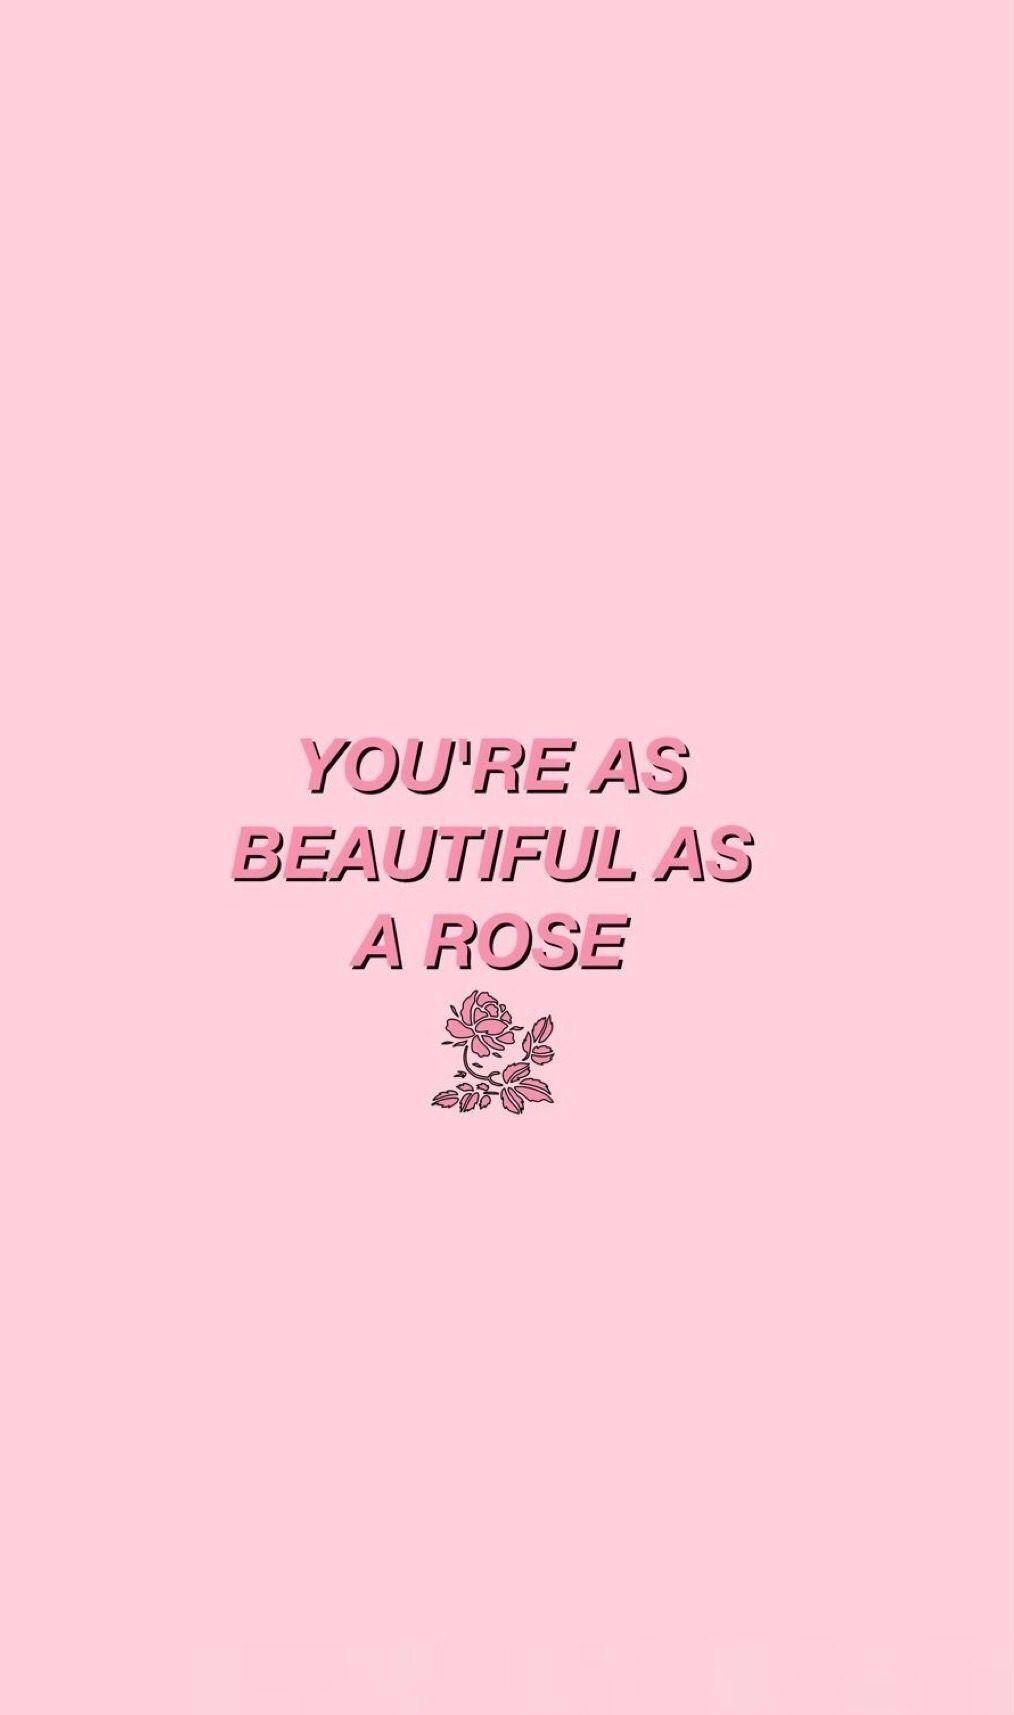 You're as beautiful a rose - Quotes